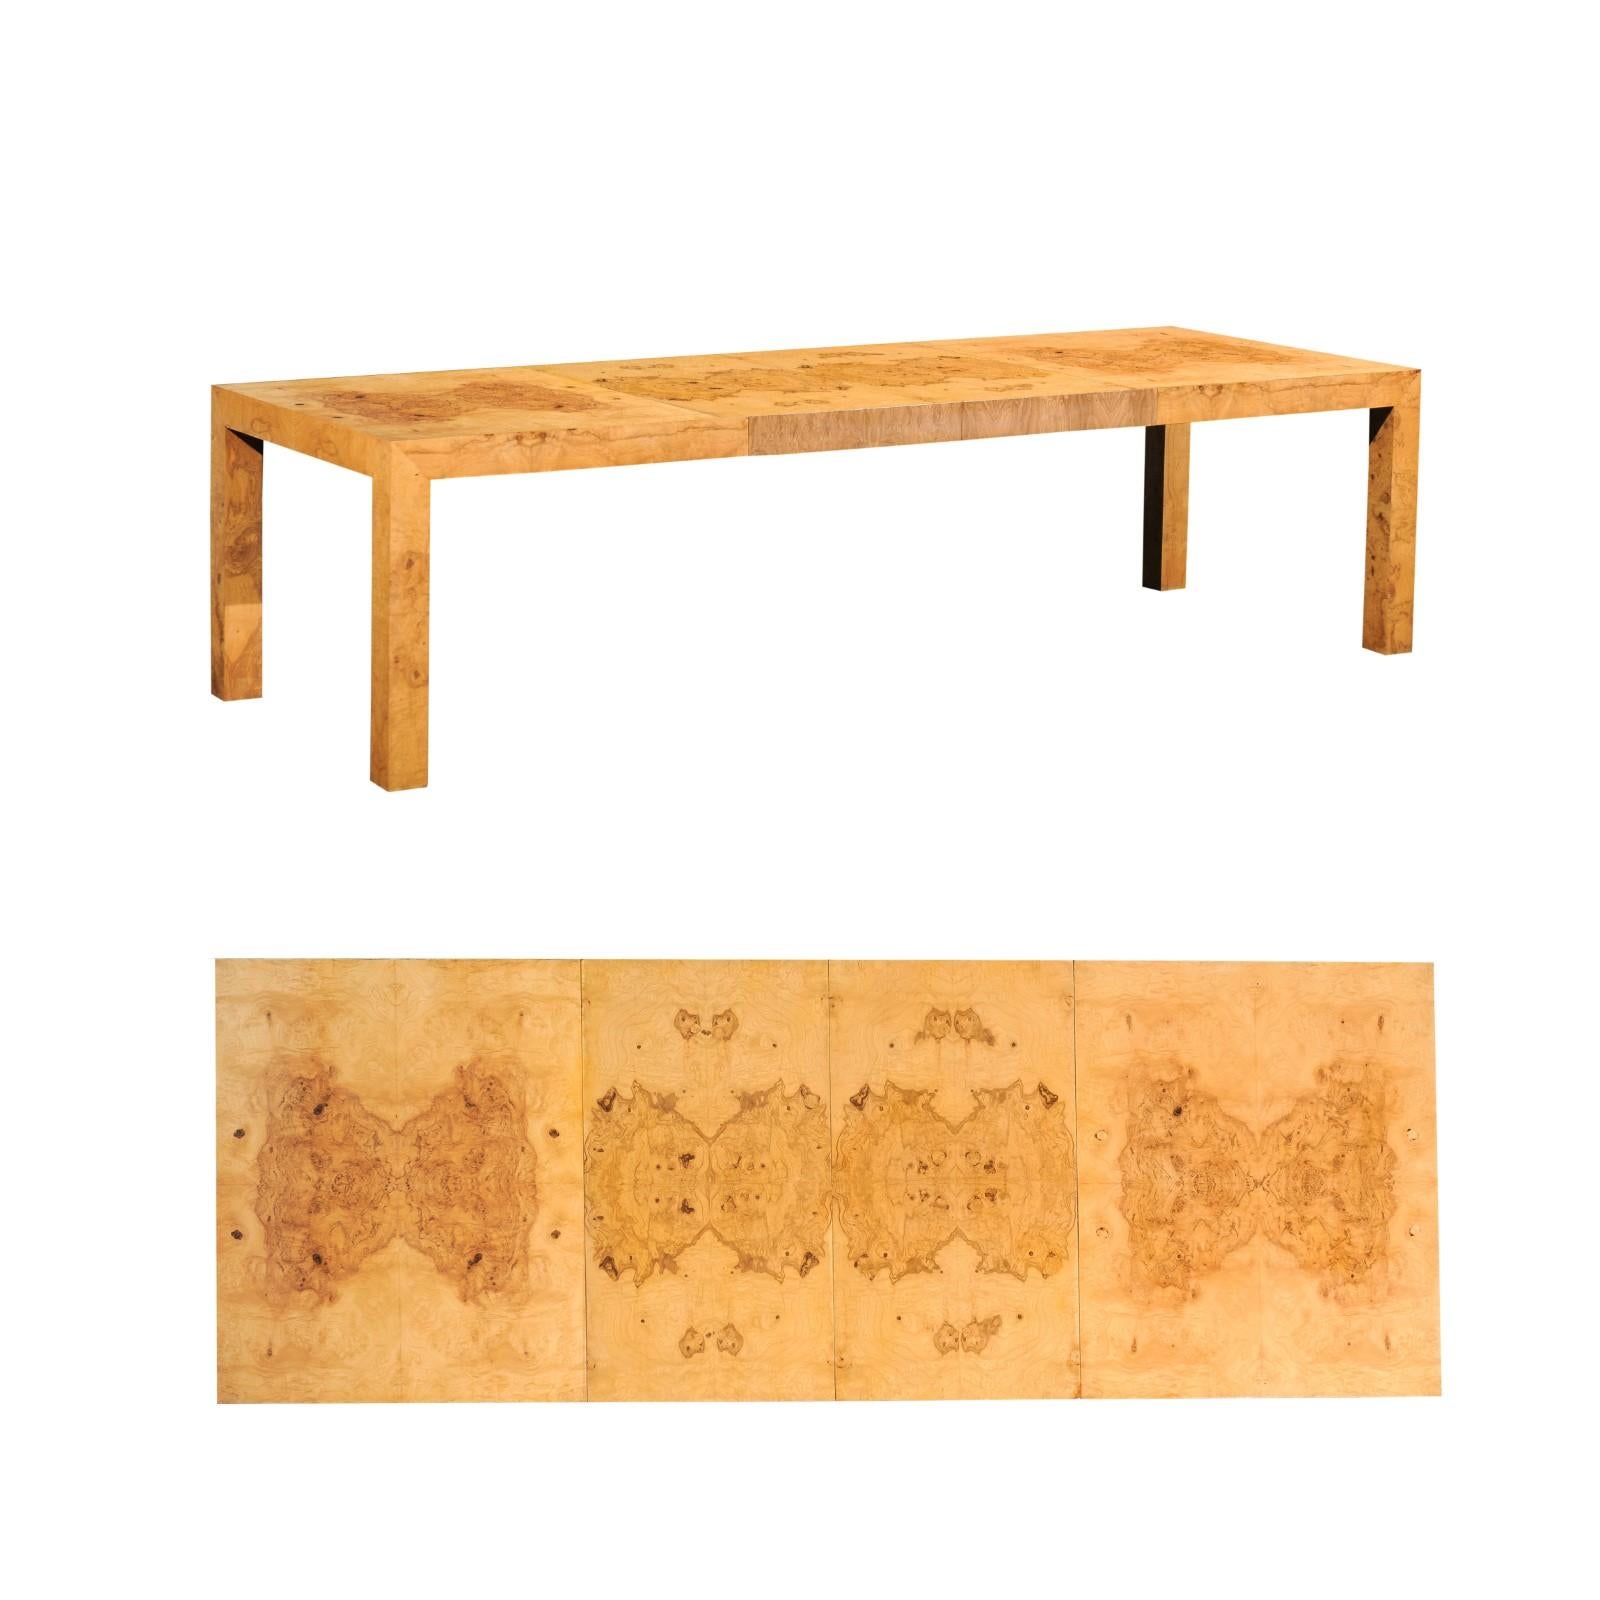 Breathtaking Olivewood Extension Dining Table by Milo Baughman, circa 1975 For Sale 7